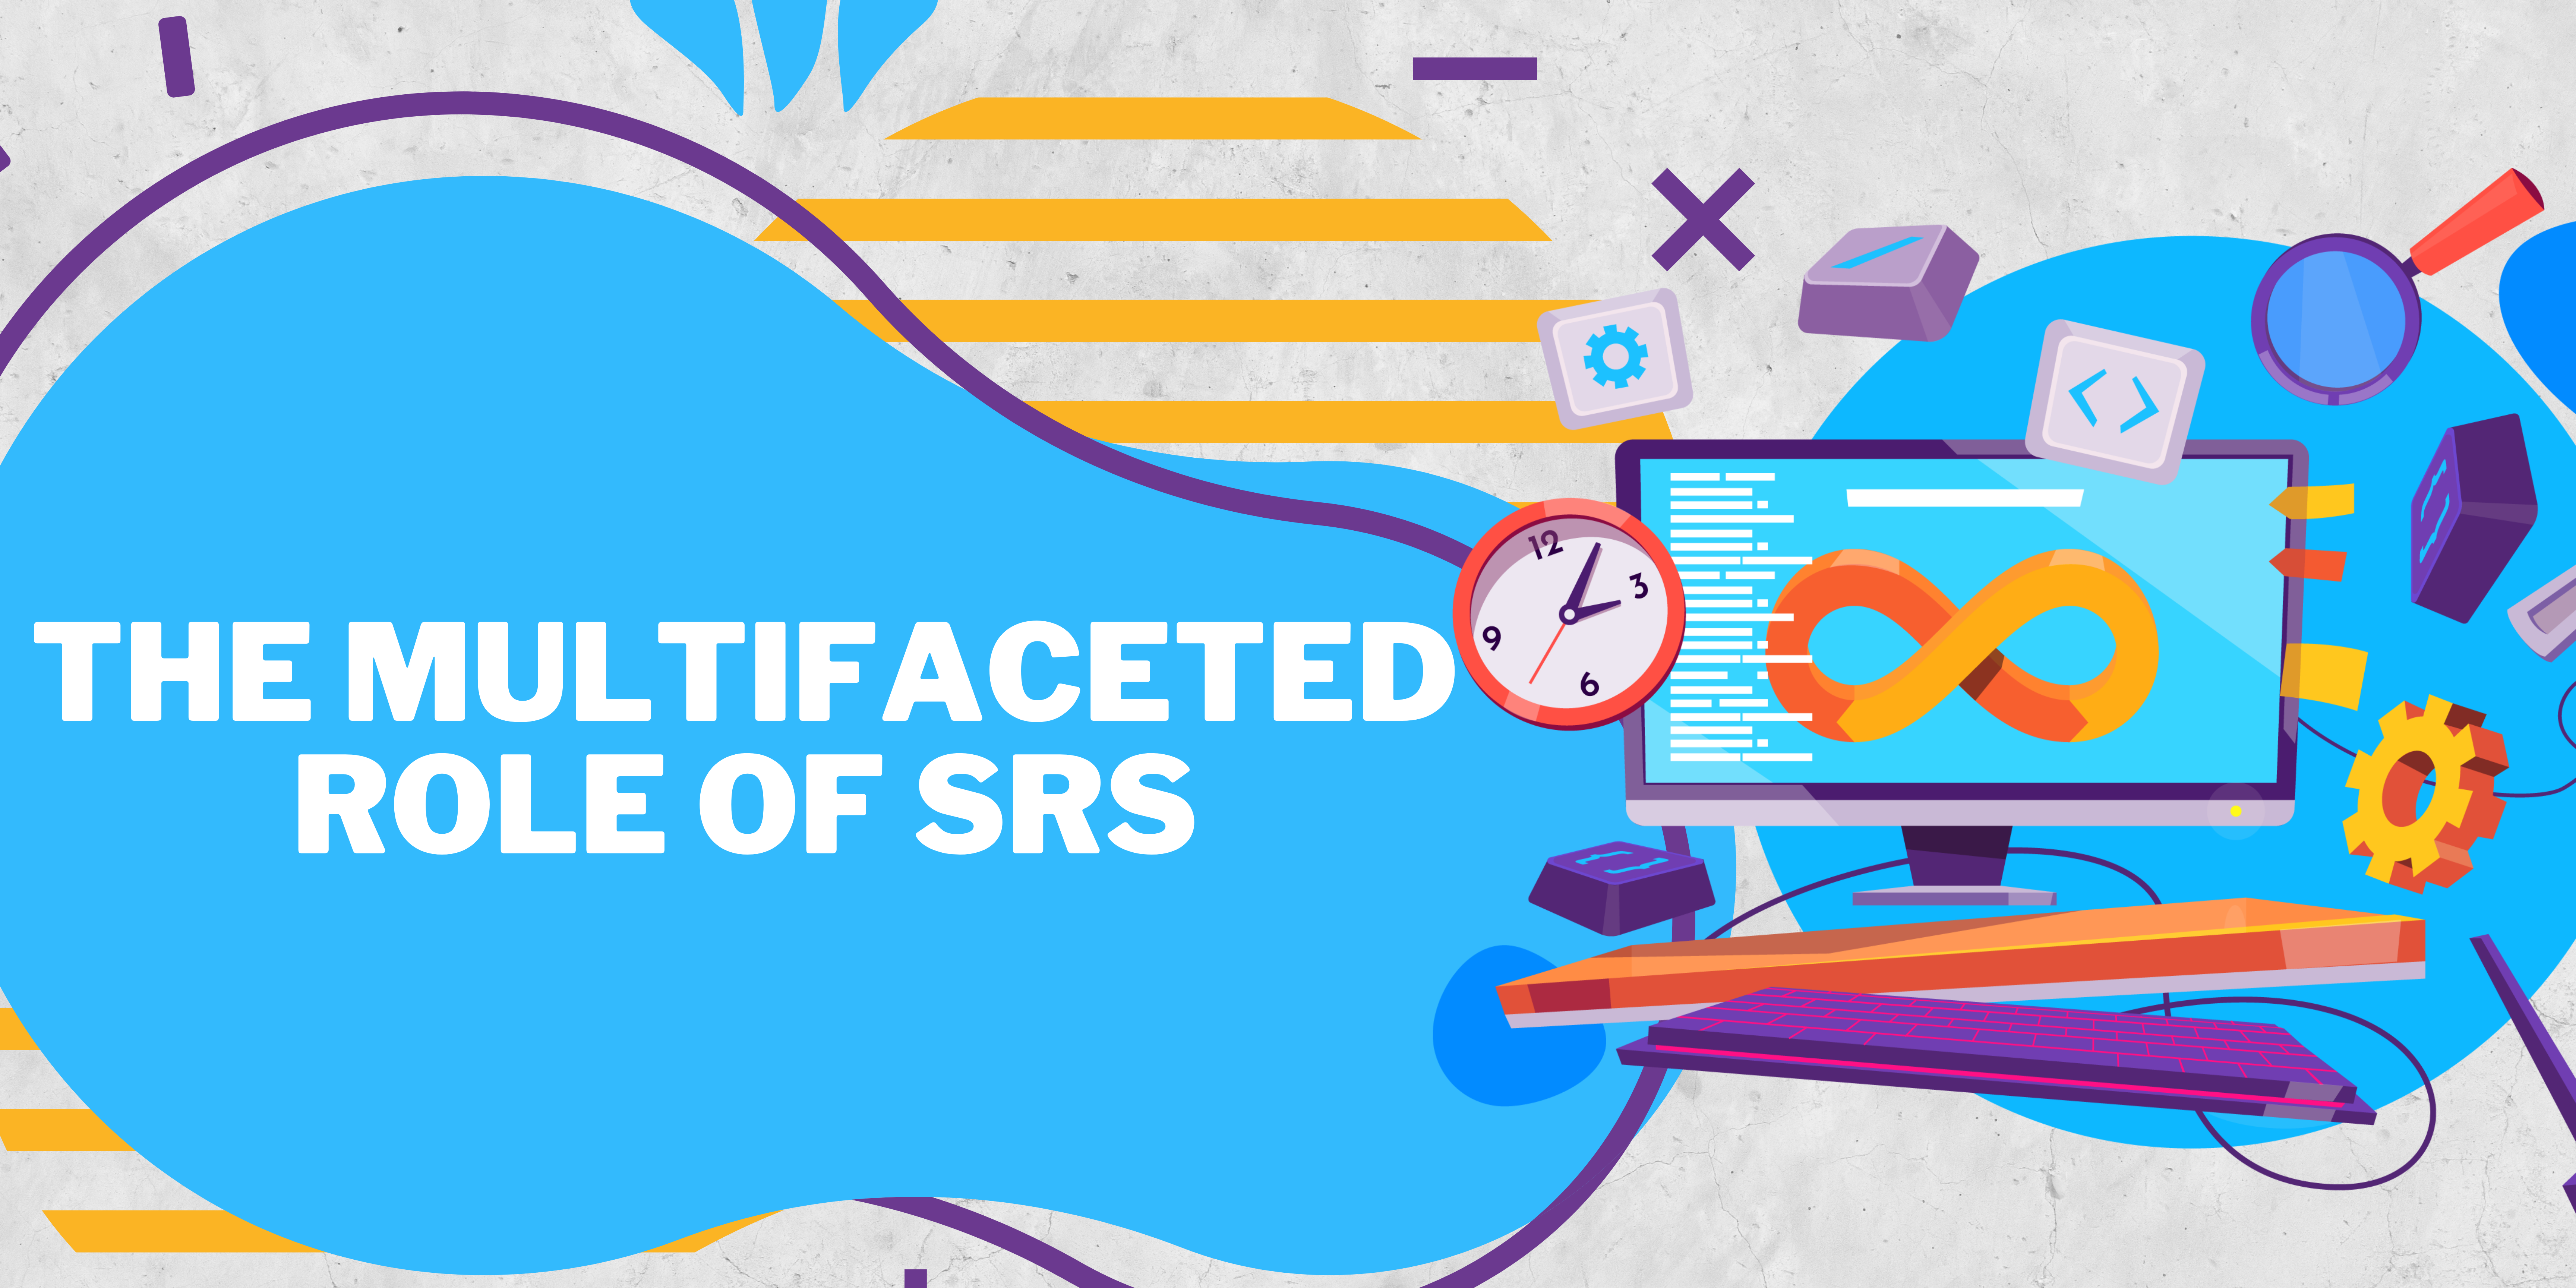 The Multifaceted Role of SRS